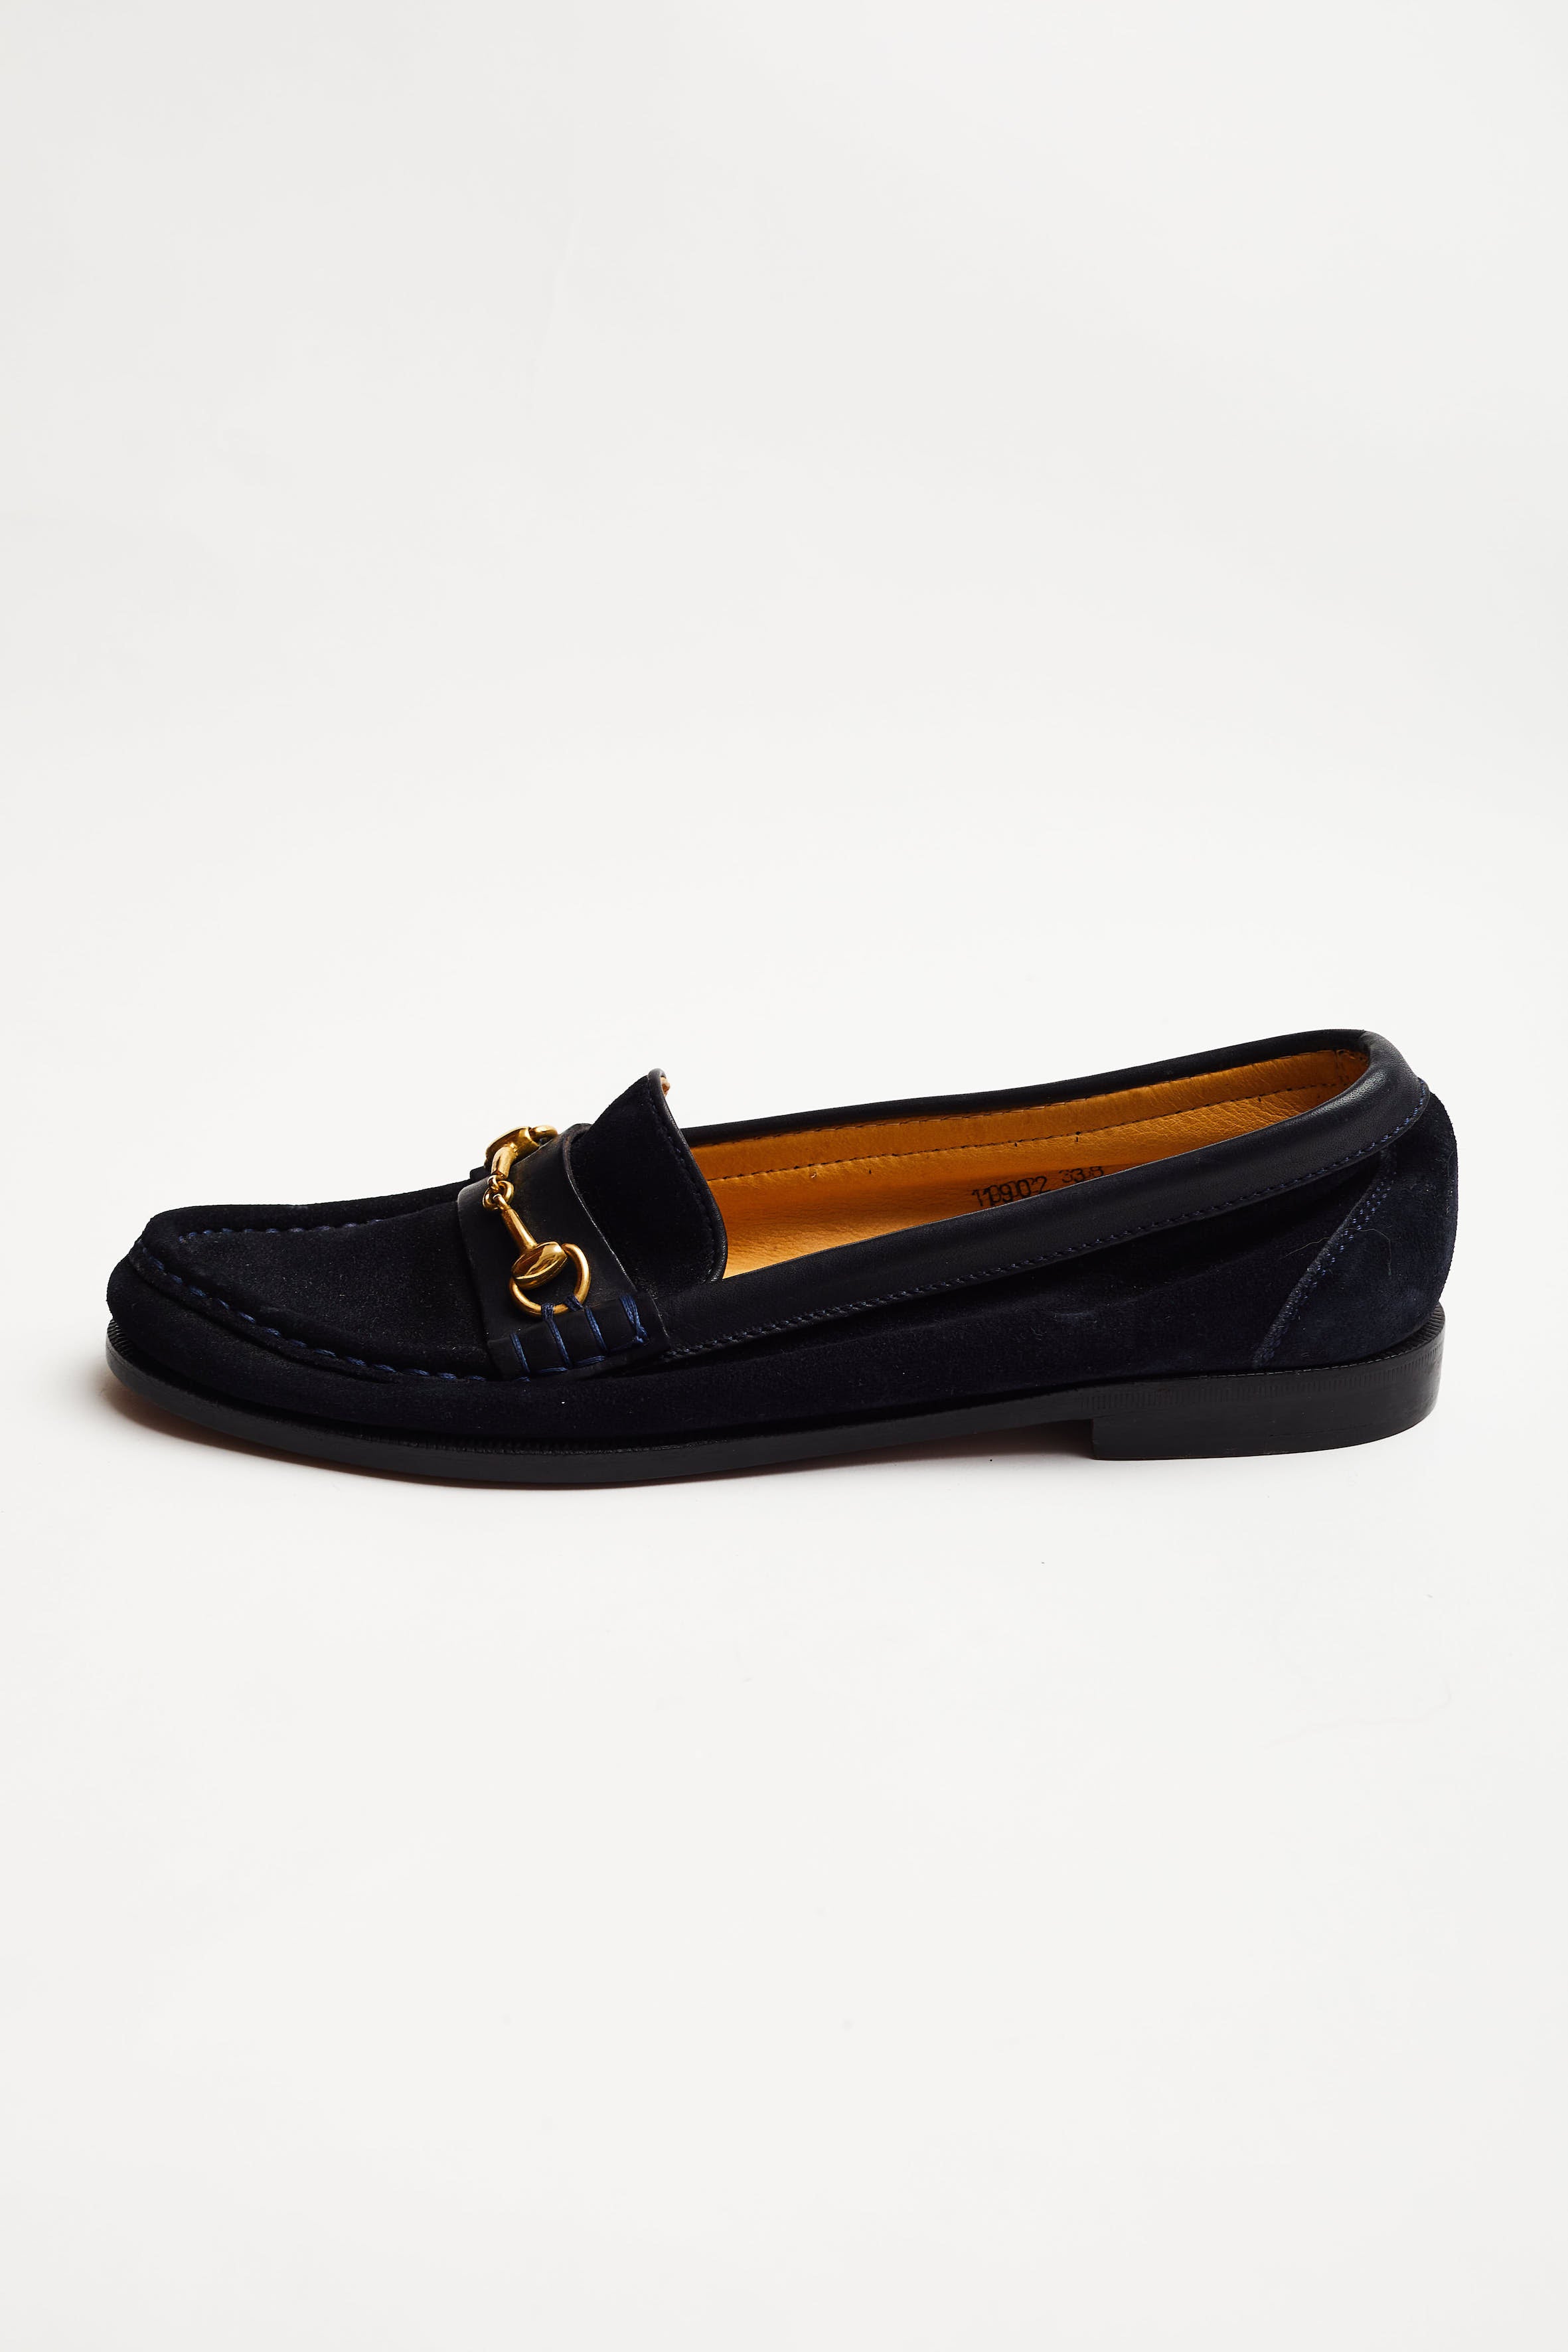 Bally <br> 80's suede loafers with gold horsebit detail